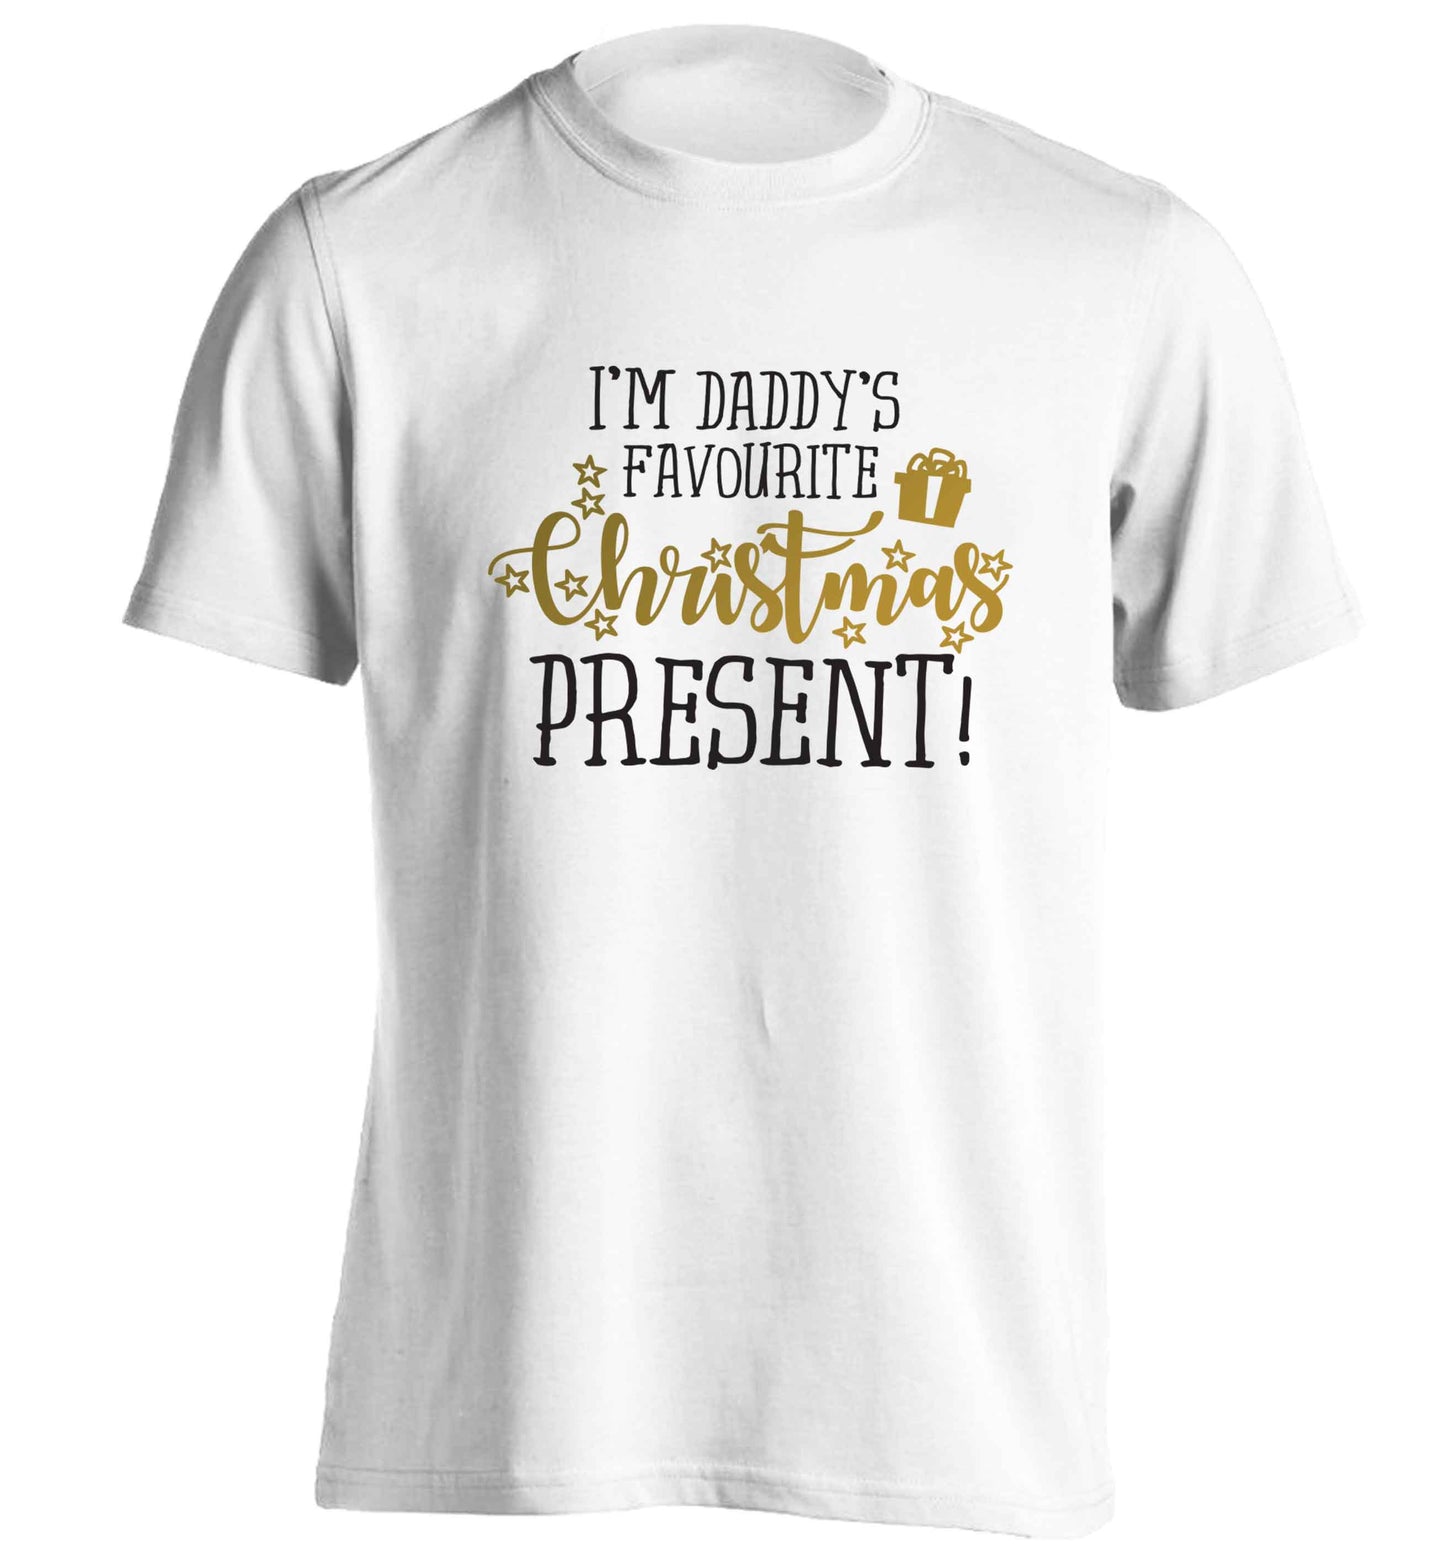 Daddy's favourite Christmas present adults unisex white Tshirt 2XL